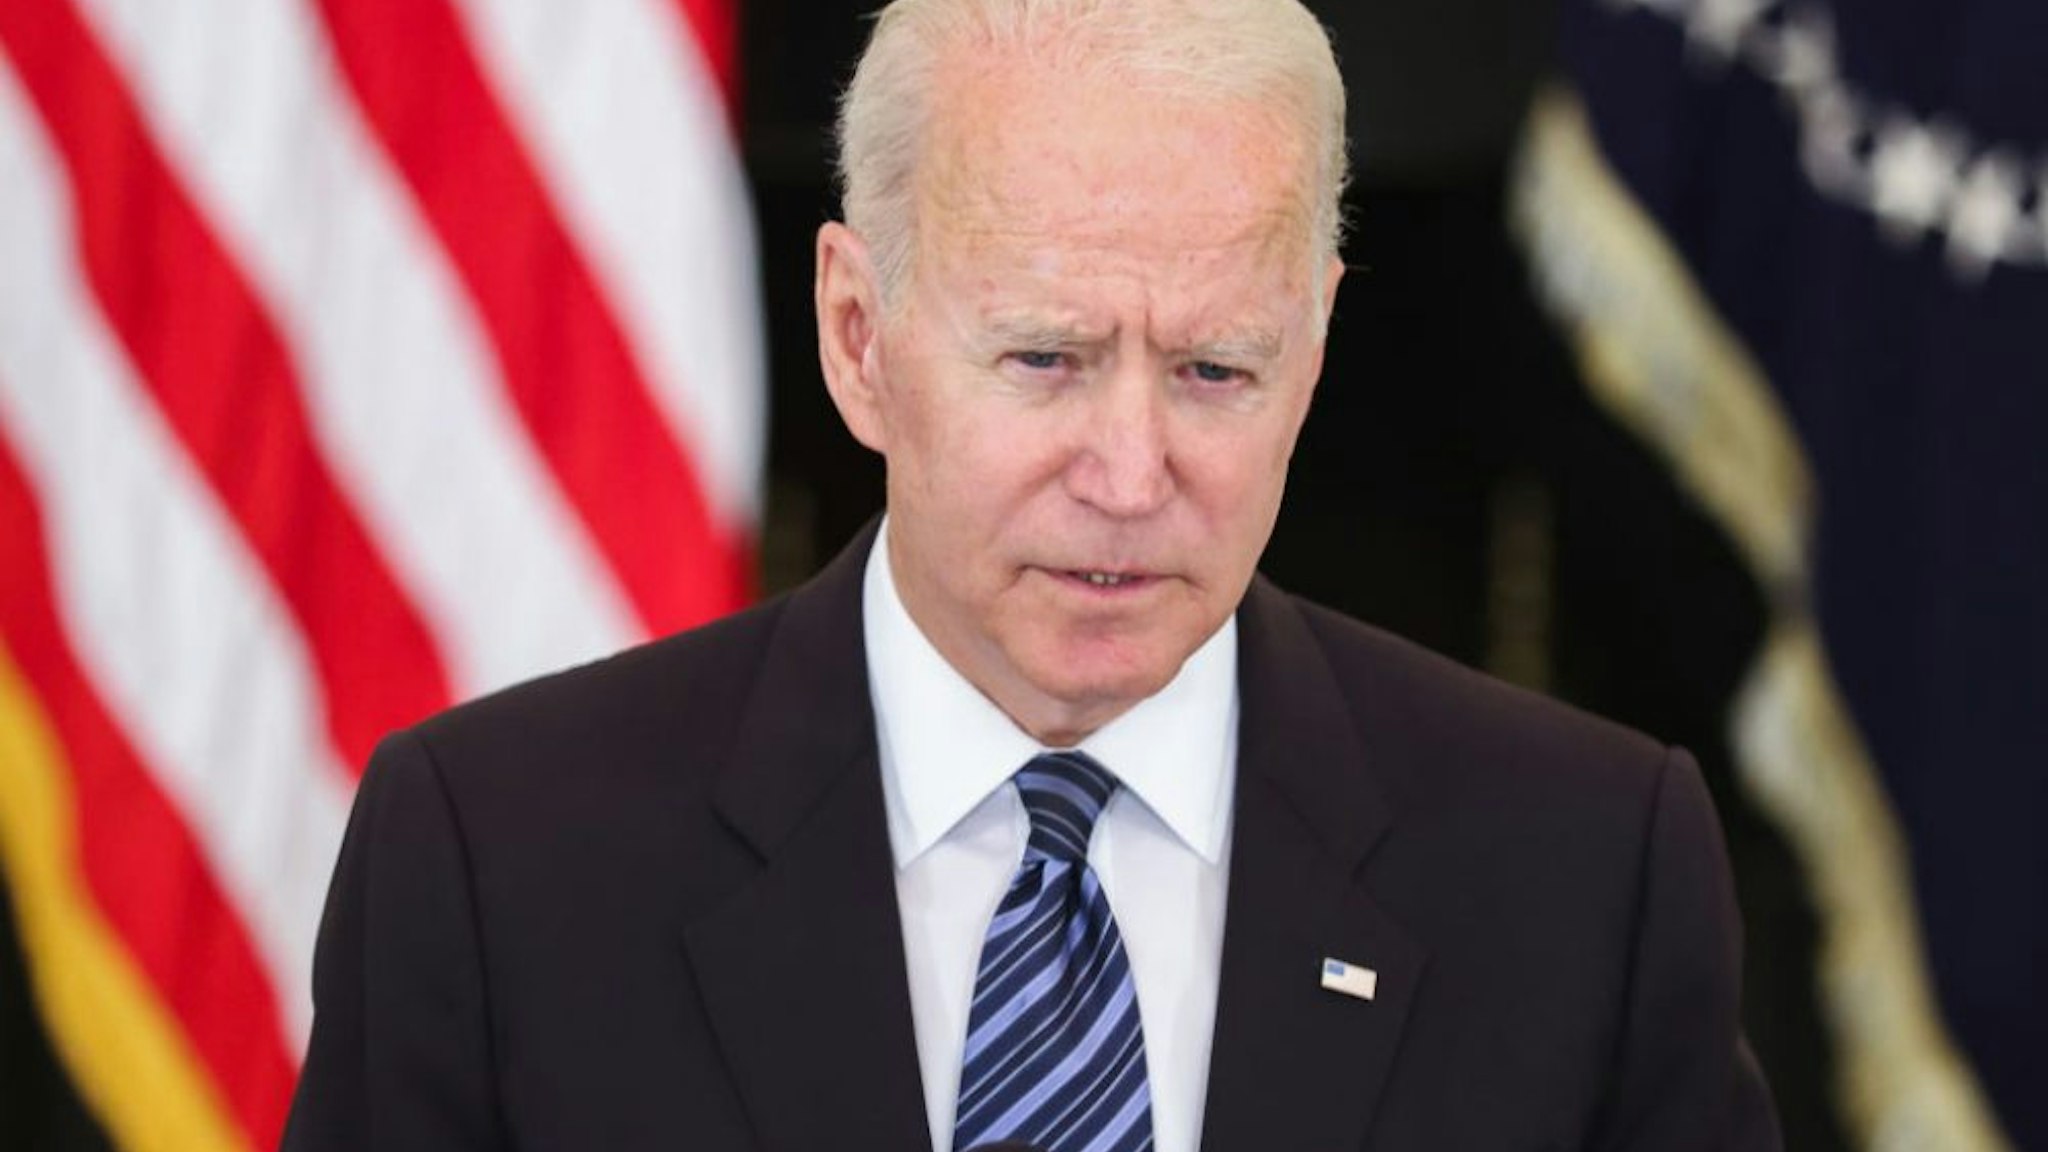 U.S. President Joe Biden speaks in the Roosevelt Room of the White House in Washington, D.C., U.S., on Wednesday, June 23, 2021. Biden will launch a comprehensive plan to curb gun crime, including by allowing states and municipalities to tap into coronavirus relief funding to hire police officers under certain circumstances.